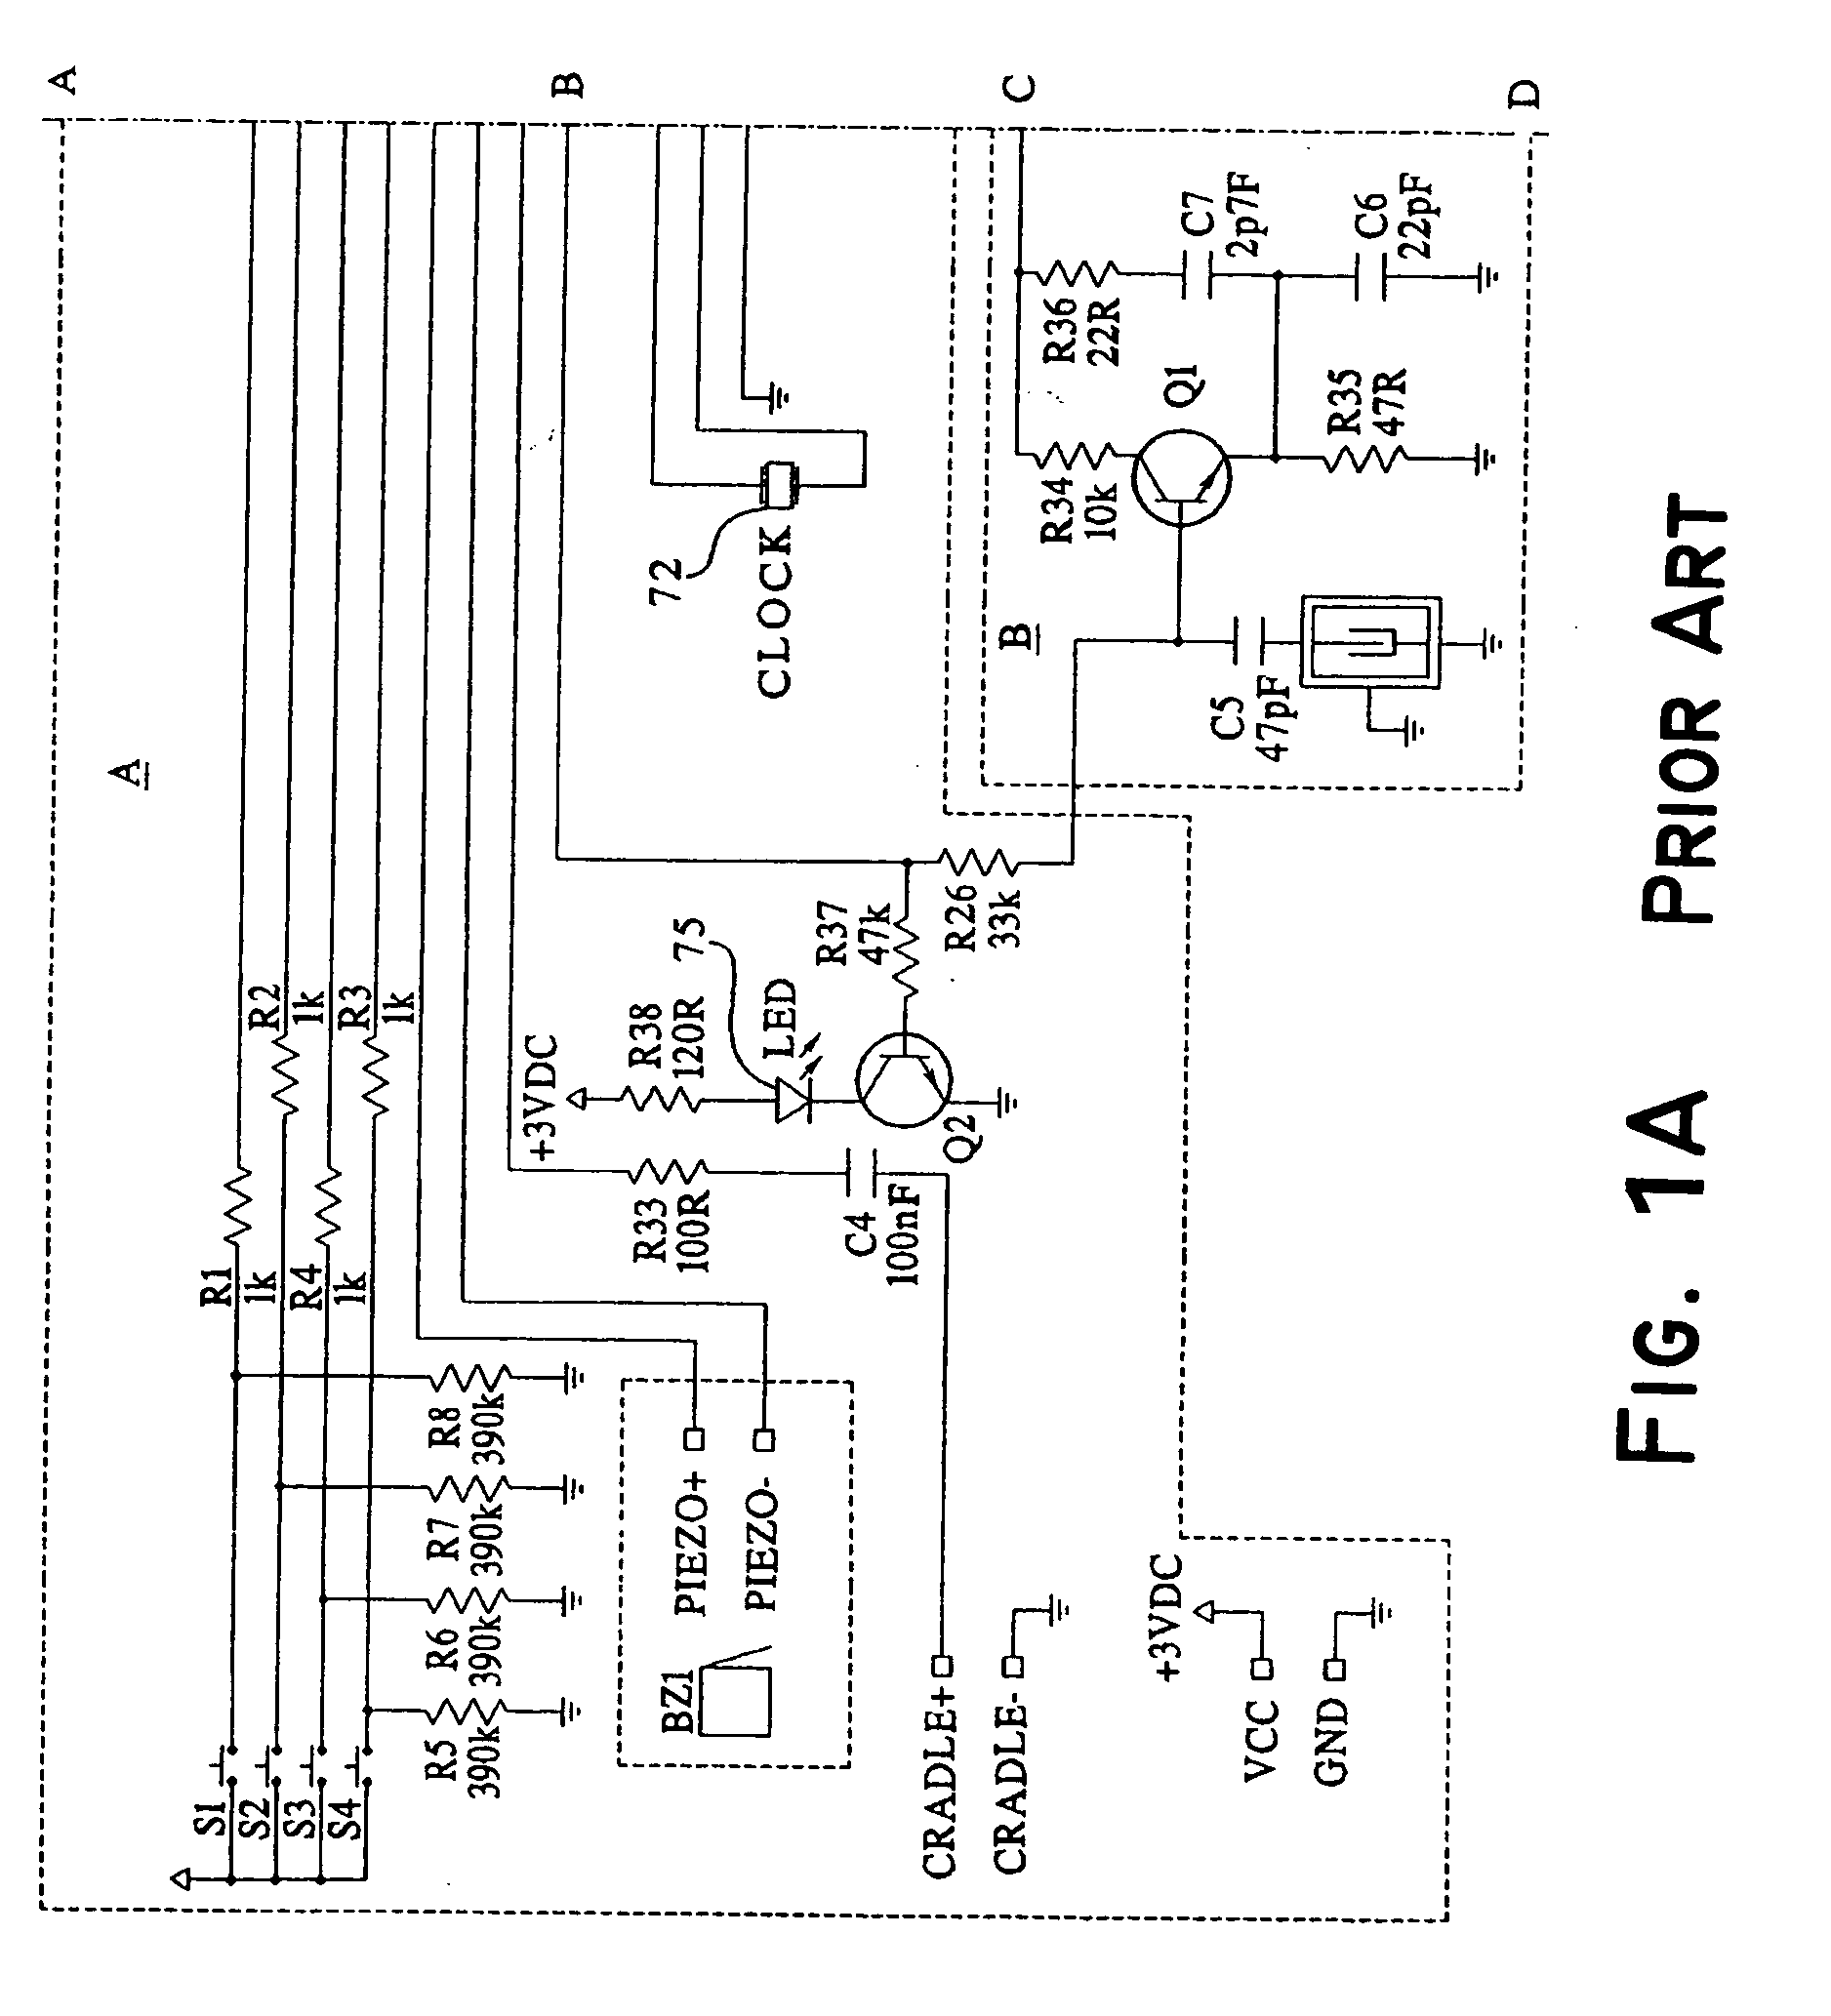 System and method for preventing loss of personal items